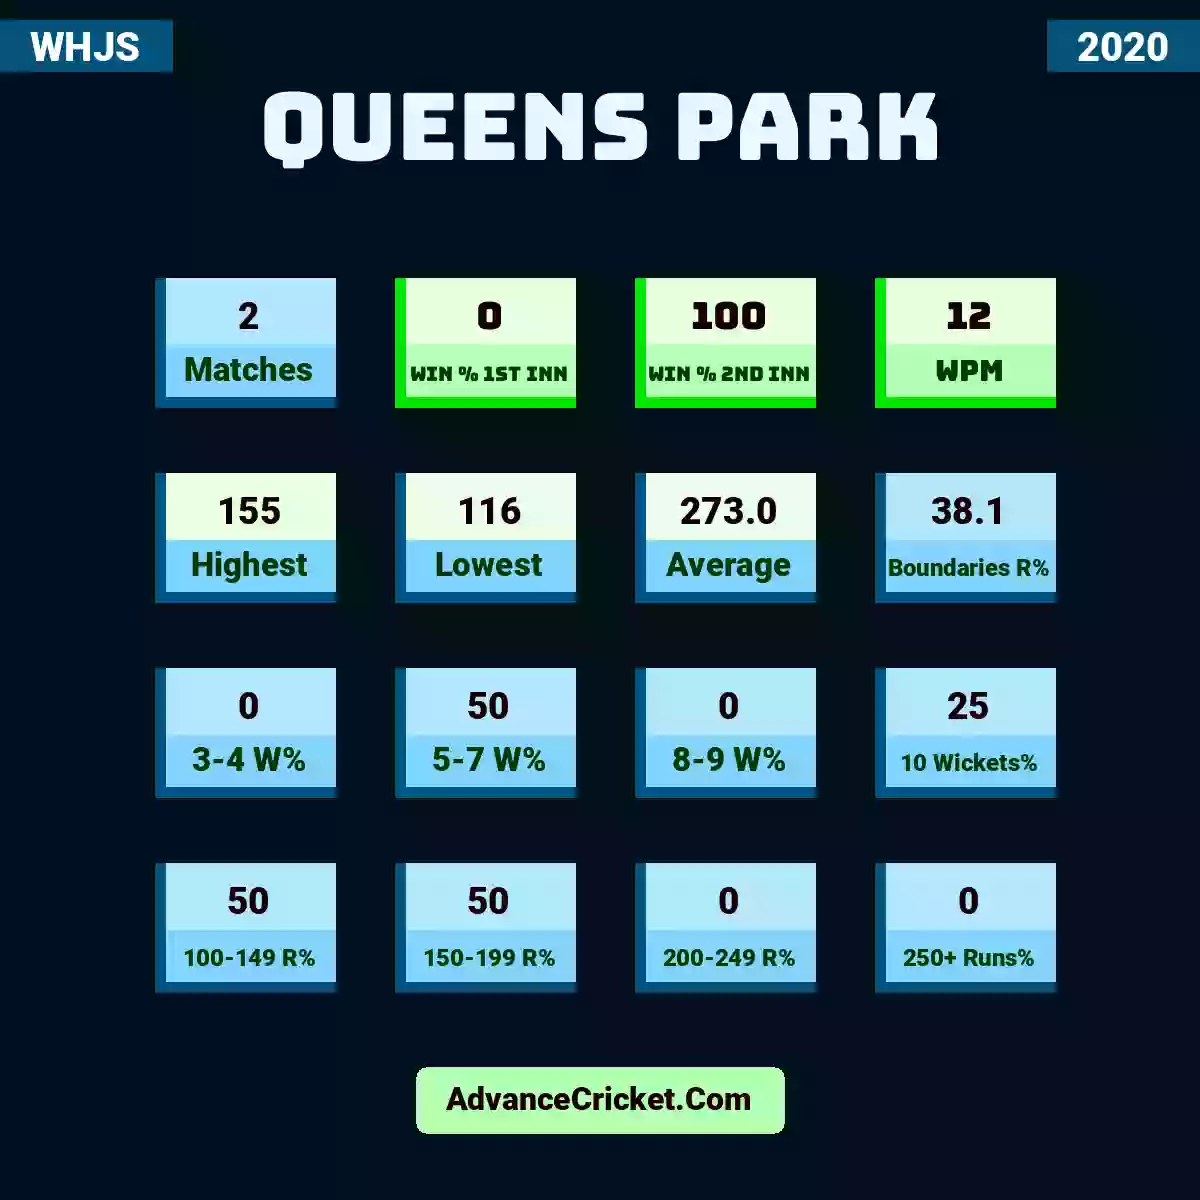 Image showing Queens Park with Matches: 2, Win % 1st Inn: 0, Win % 2nd Inn: 100, WPM: 12, Highest: 155, Lowest: 116, Average: 273.0, Boundaries R%: 38.1, 3-4 W%: 0, 5-7 W%: 50, 8-9 W%: 0, 10 Wickets%: 25, 100-149 R%: 50, 150-199 R%: 50, 200-249 R%: 0, 250+ Runs%: 0.